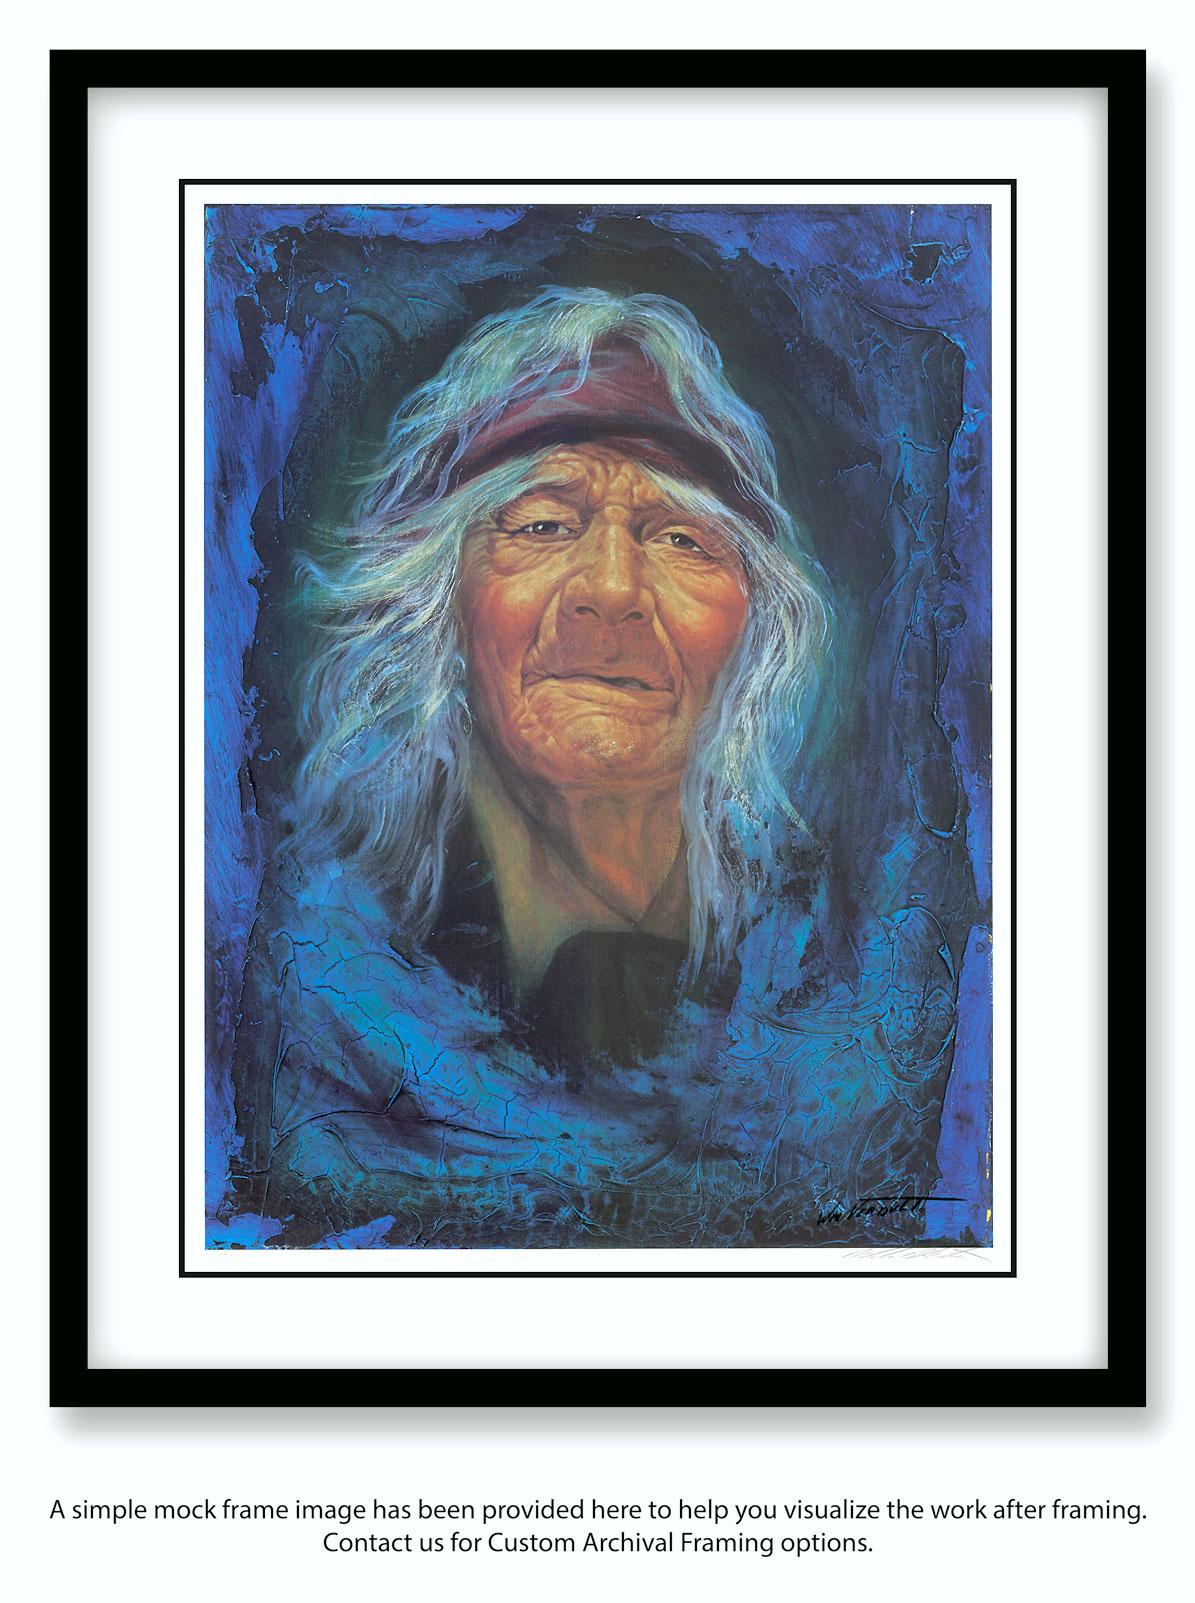 “The Apache,” a Limited Edition and Hand-Signed Lithograph by William Verdult, The Dutchmaster, is an exquisite example of his masterful work. Verdult's genius reflects a fiery artistic approach that inspires unexplored feelings within the